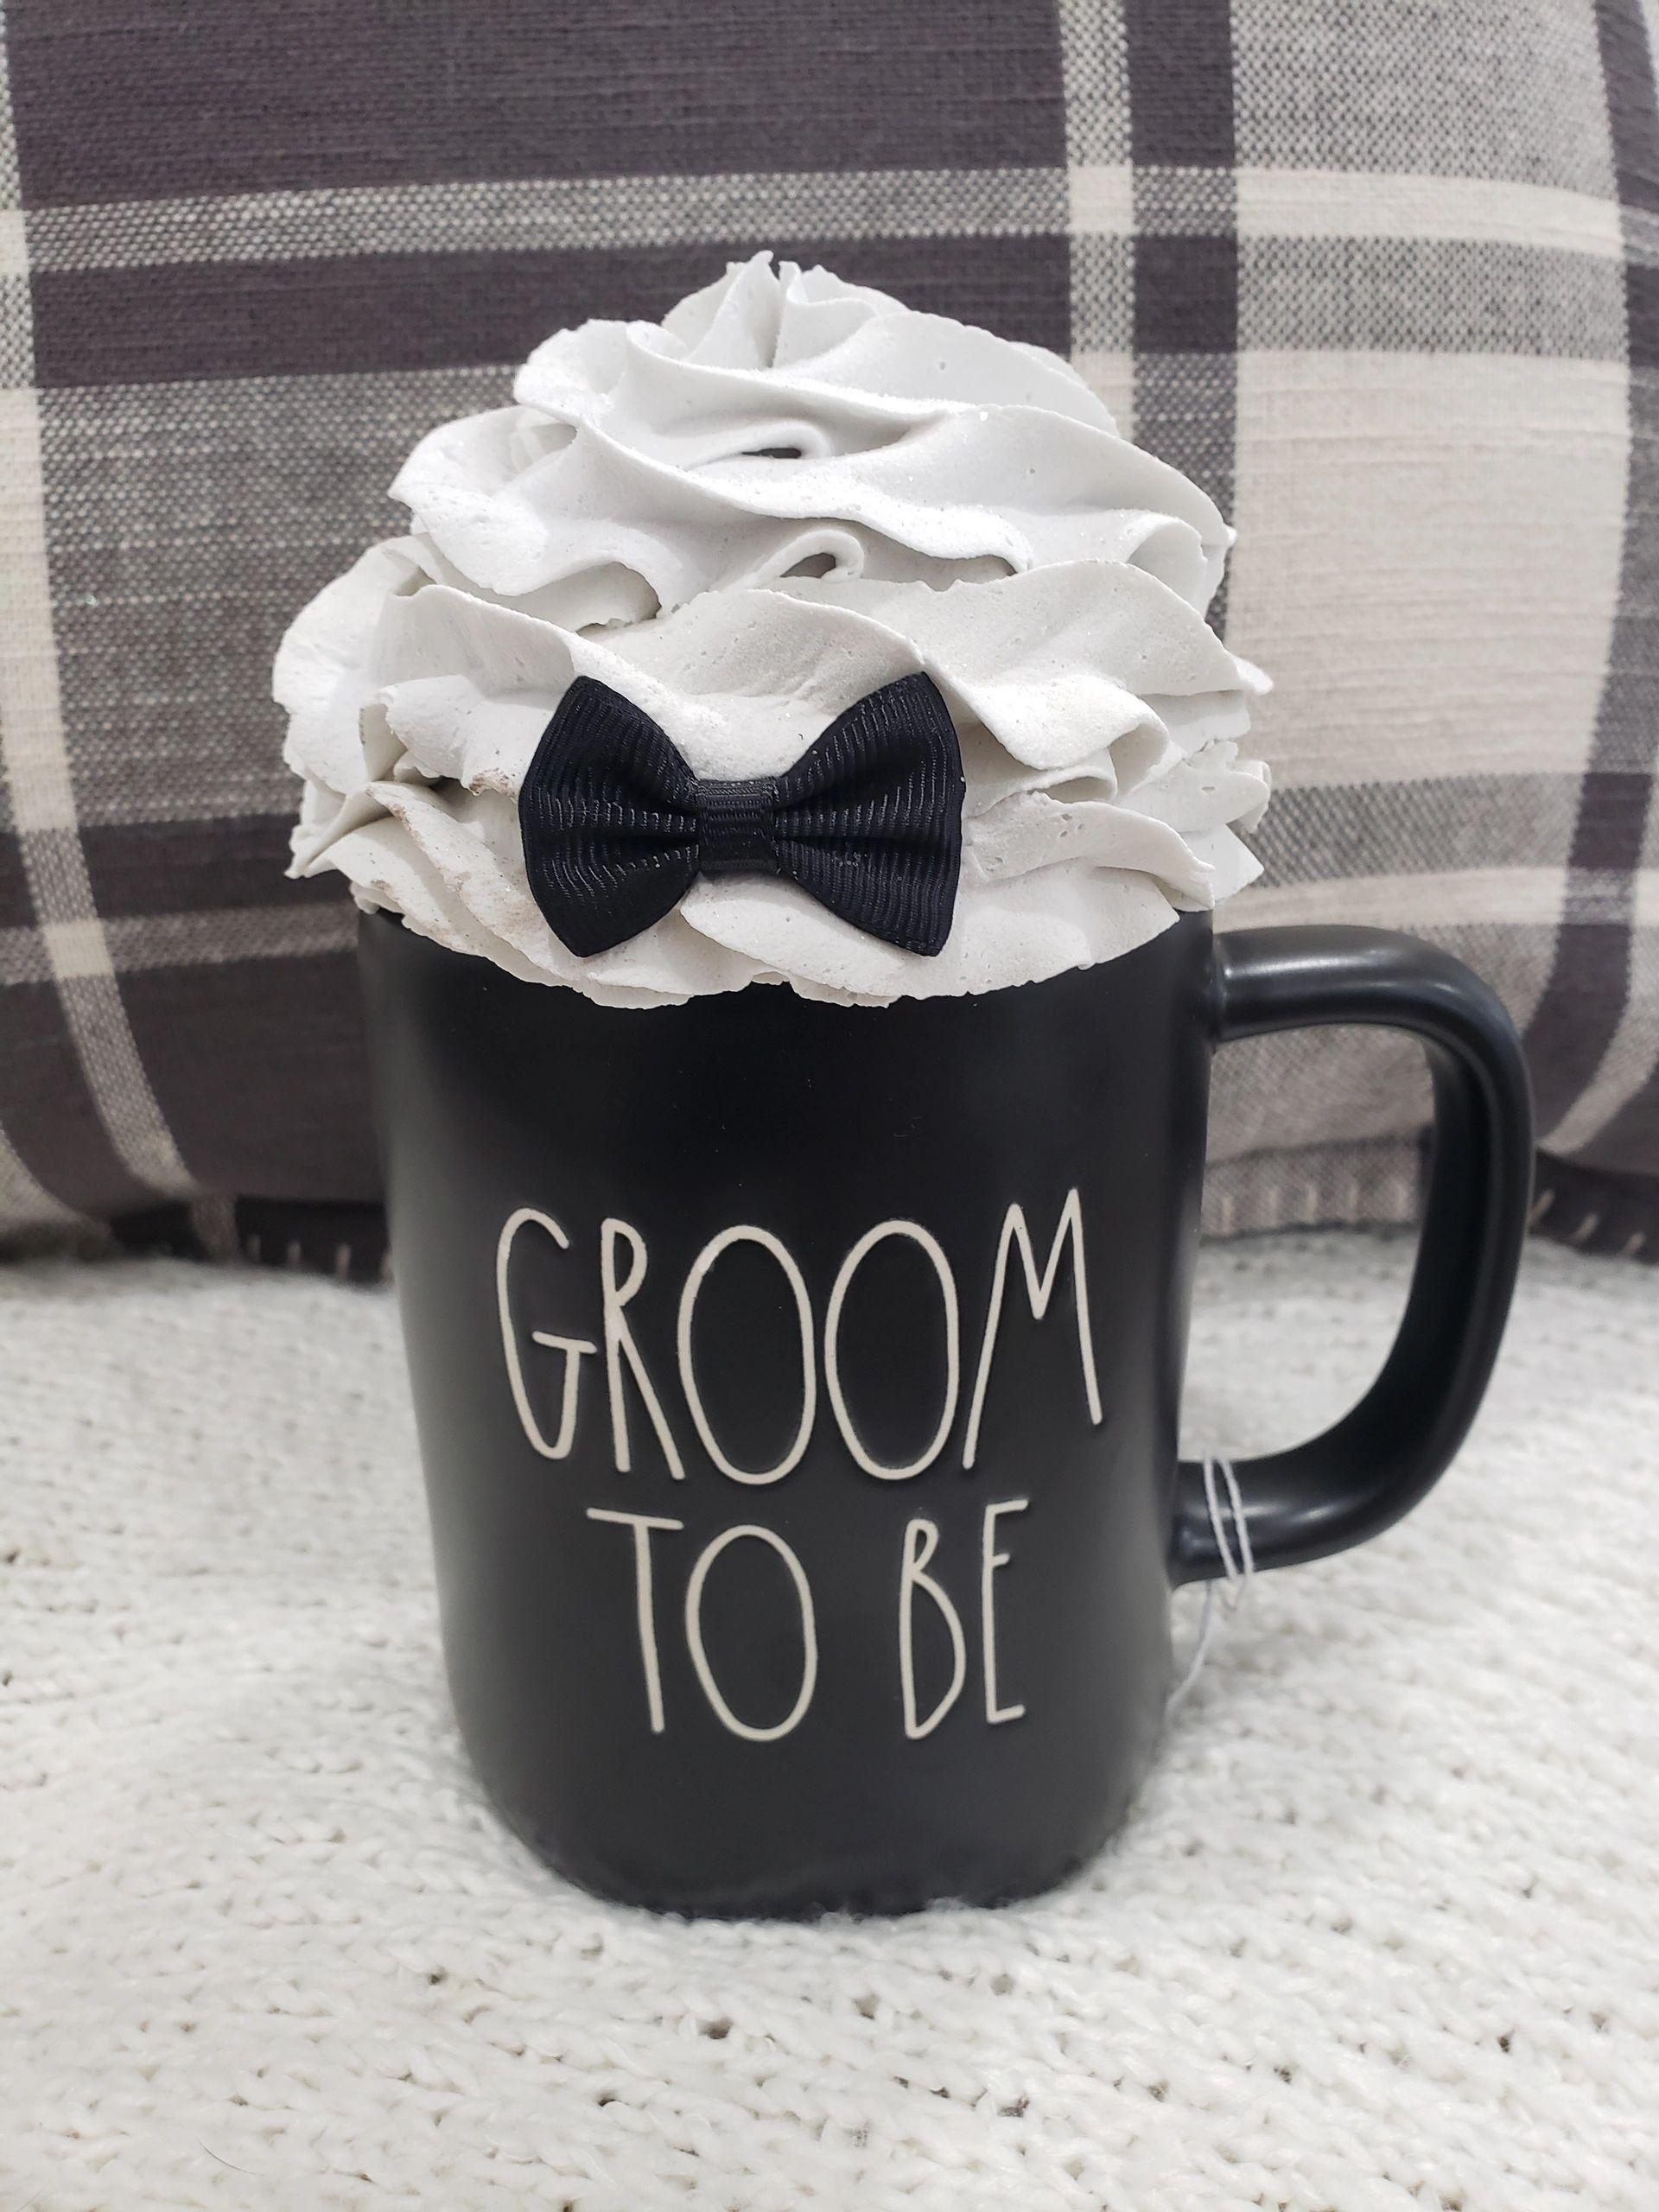 Rae Dunn "Groom To Be" Mug & Pip Posh Designs Faux Sweet Décor Whipped Topper Bridal Collection